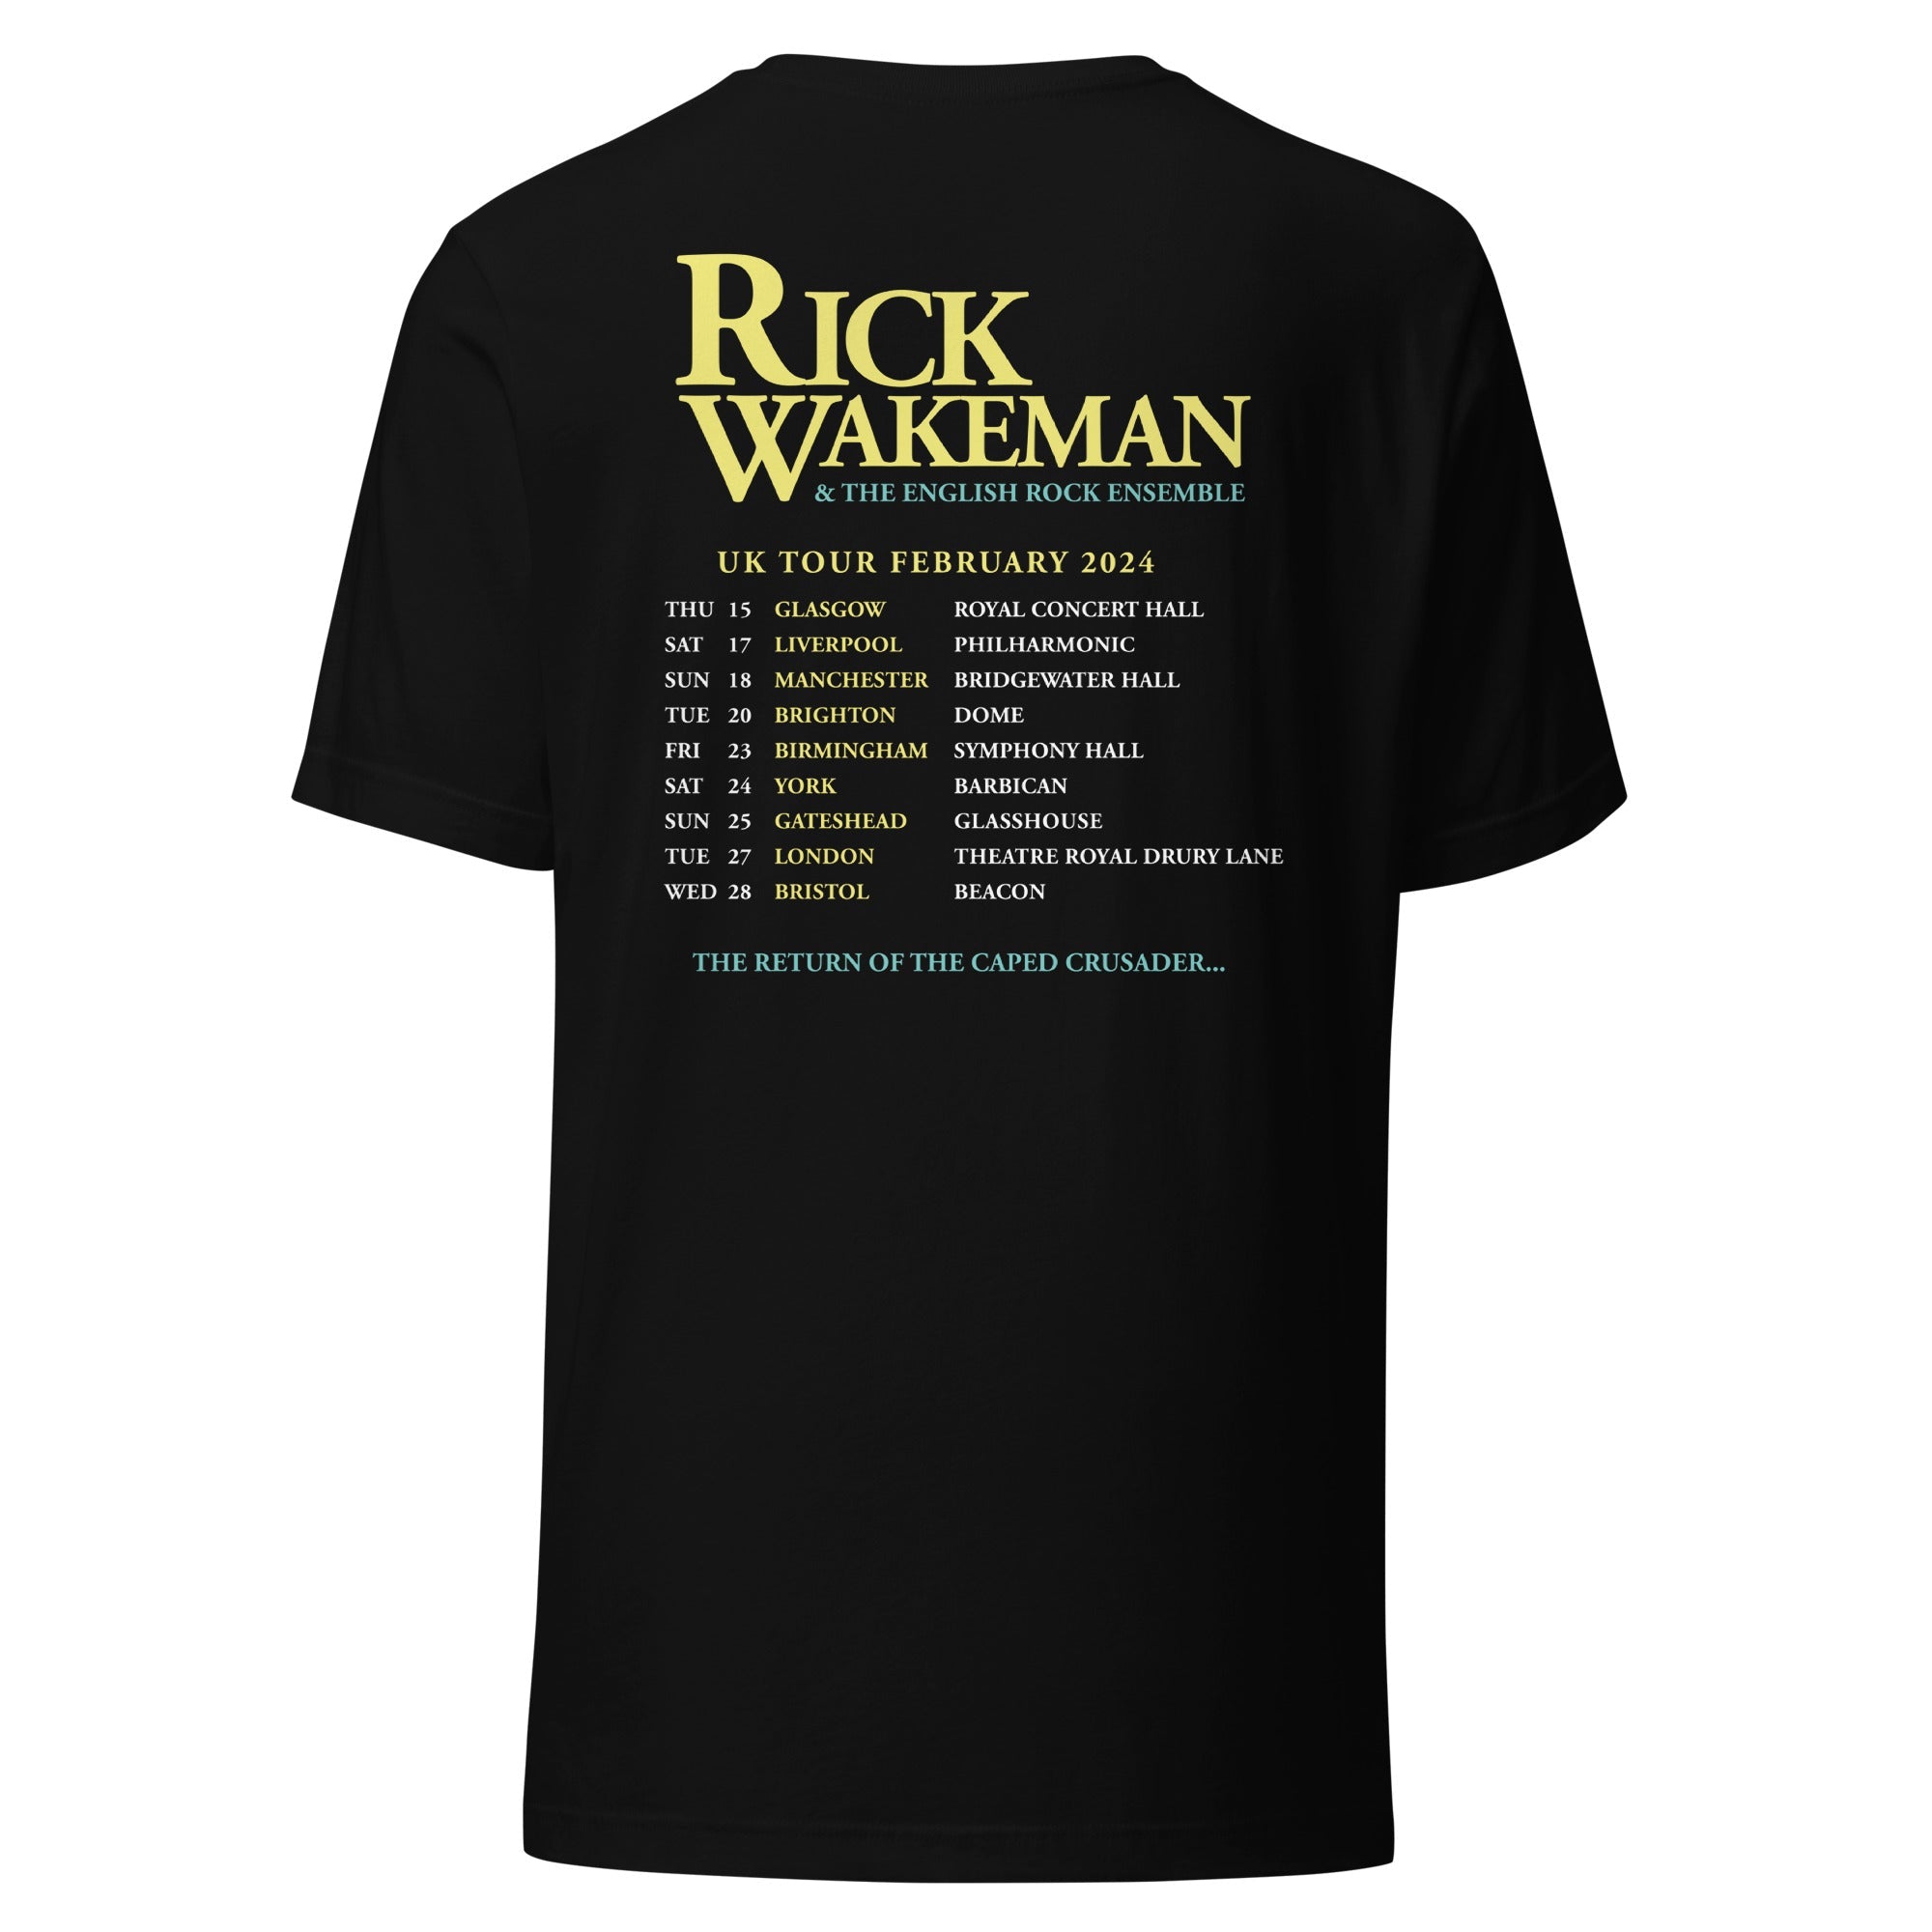 Return Of The Caped Crusader Tour T-Shirt